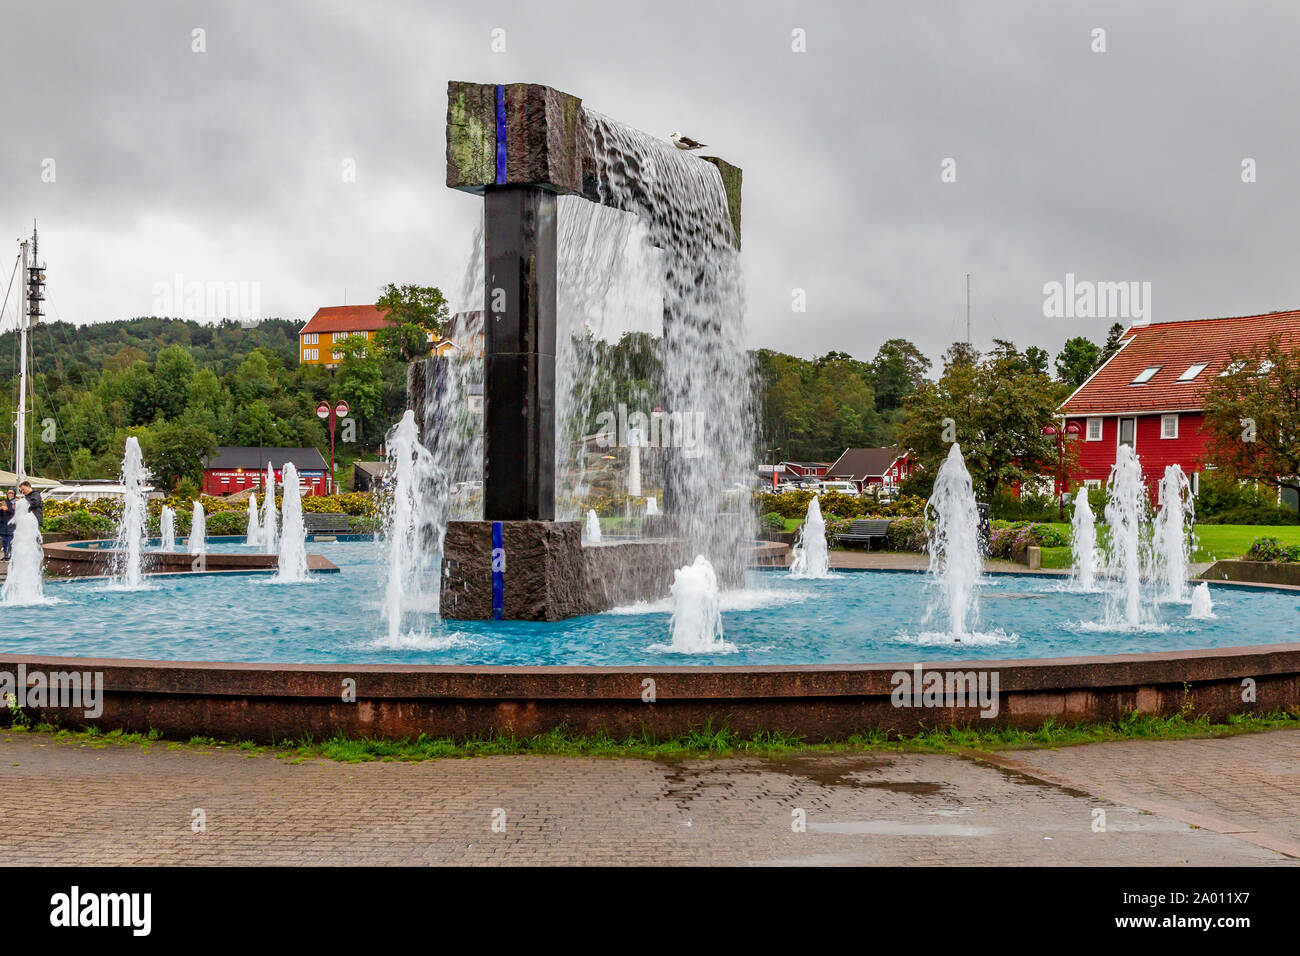 Kristiansand, Norway, Europe. The Otterdals Park with water fountain. Stock Photo